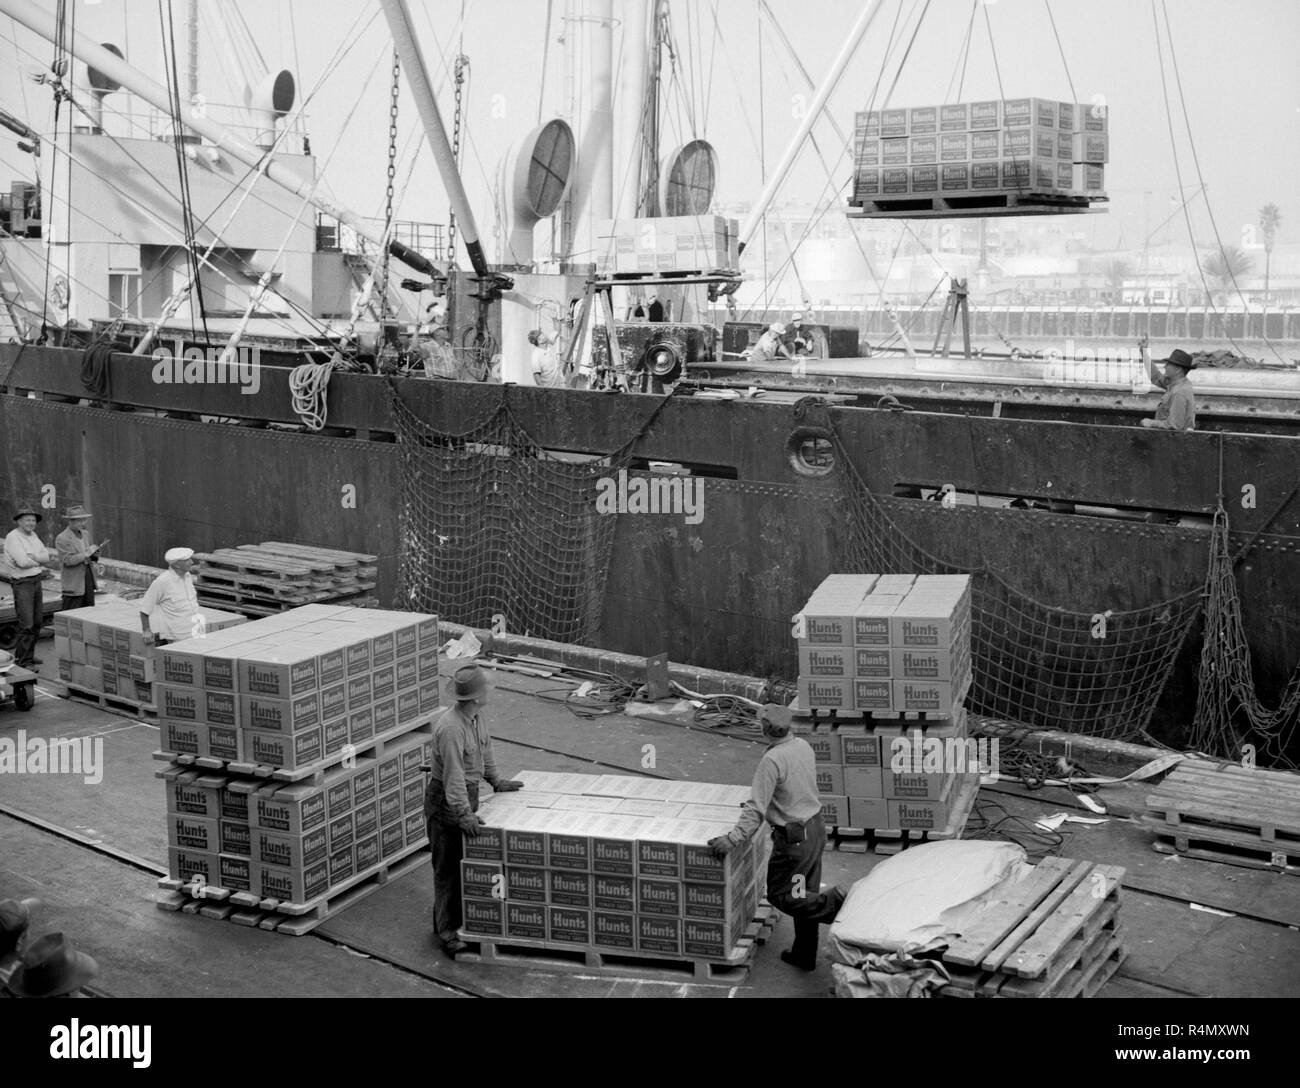 A ship is unloaded at the Port of Los Angeles in California, ca. 1955. Stock Photo